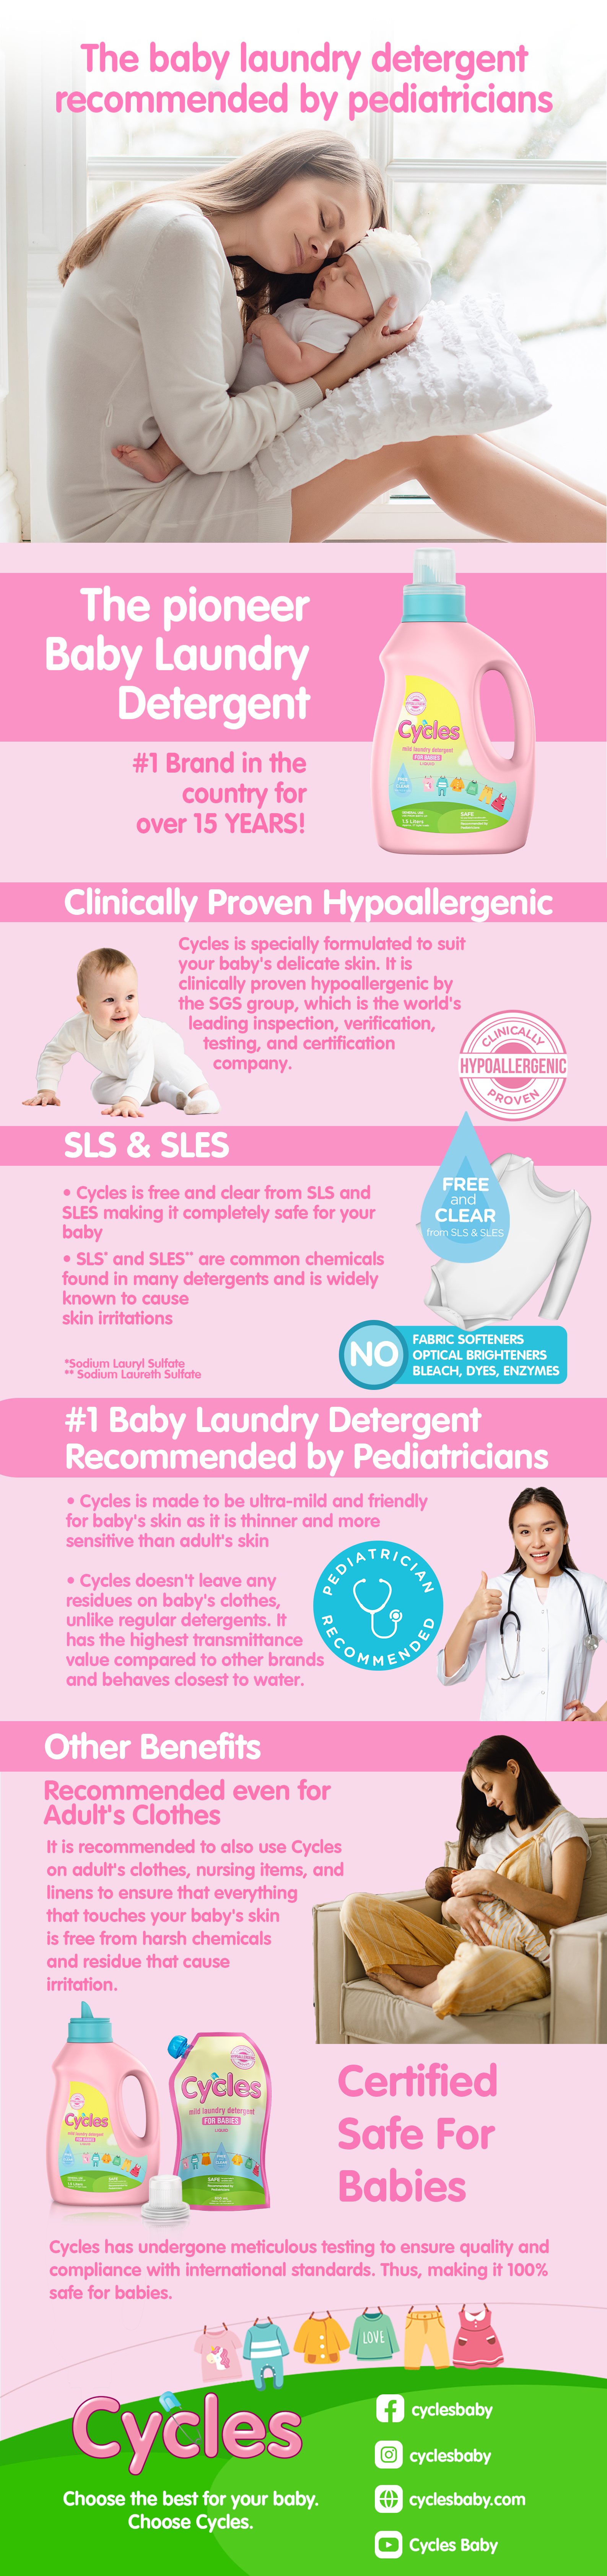 Cycles Mild Baby Laundry Liquid Detergent is proven to be mild and hypoallergenic. It's free from harsh chemicals, making it safe for babies' sensitive skin.